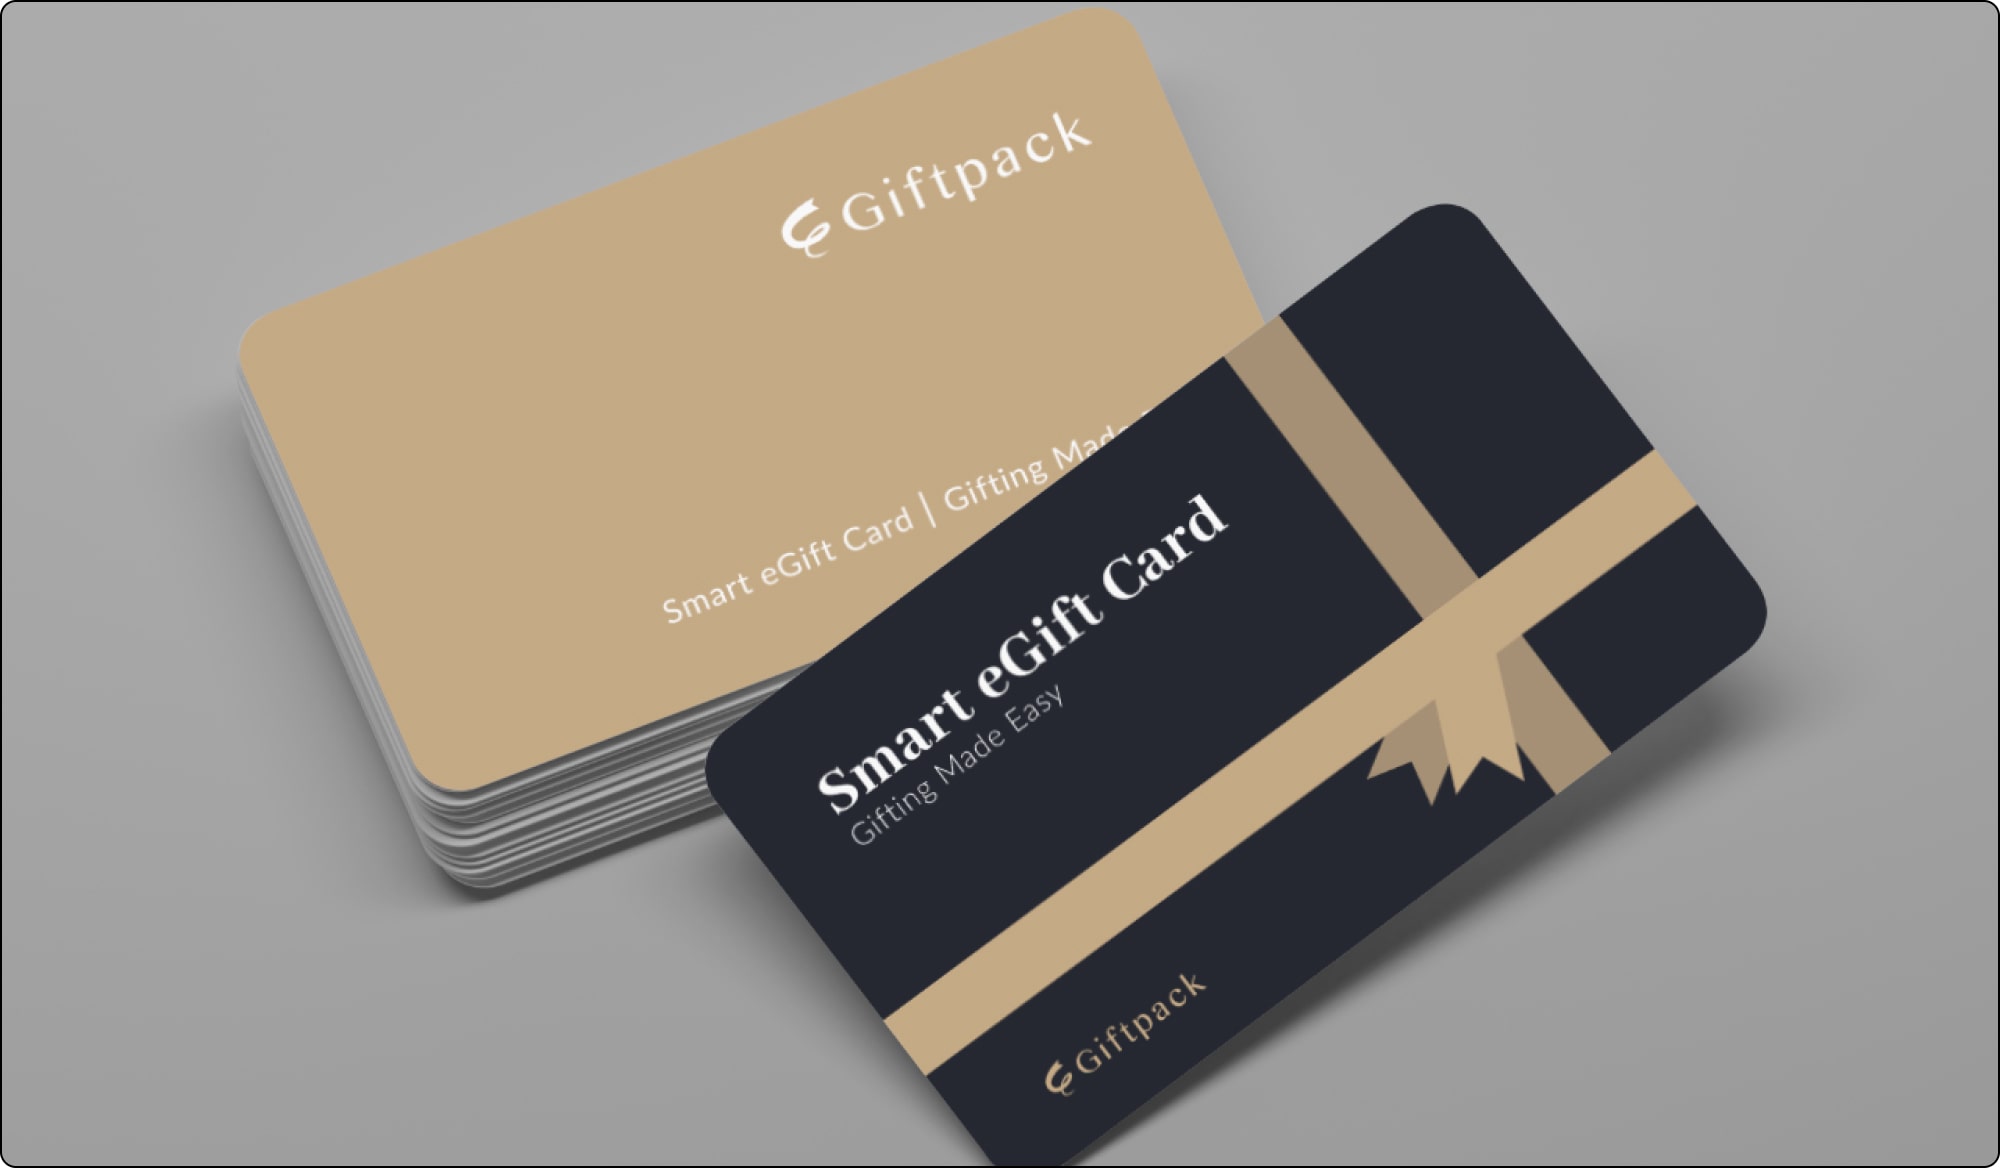 giftpack smart egift card for 350 brands for employee of the month gift ideas